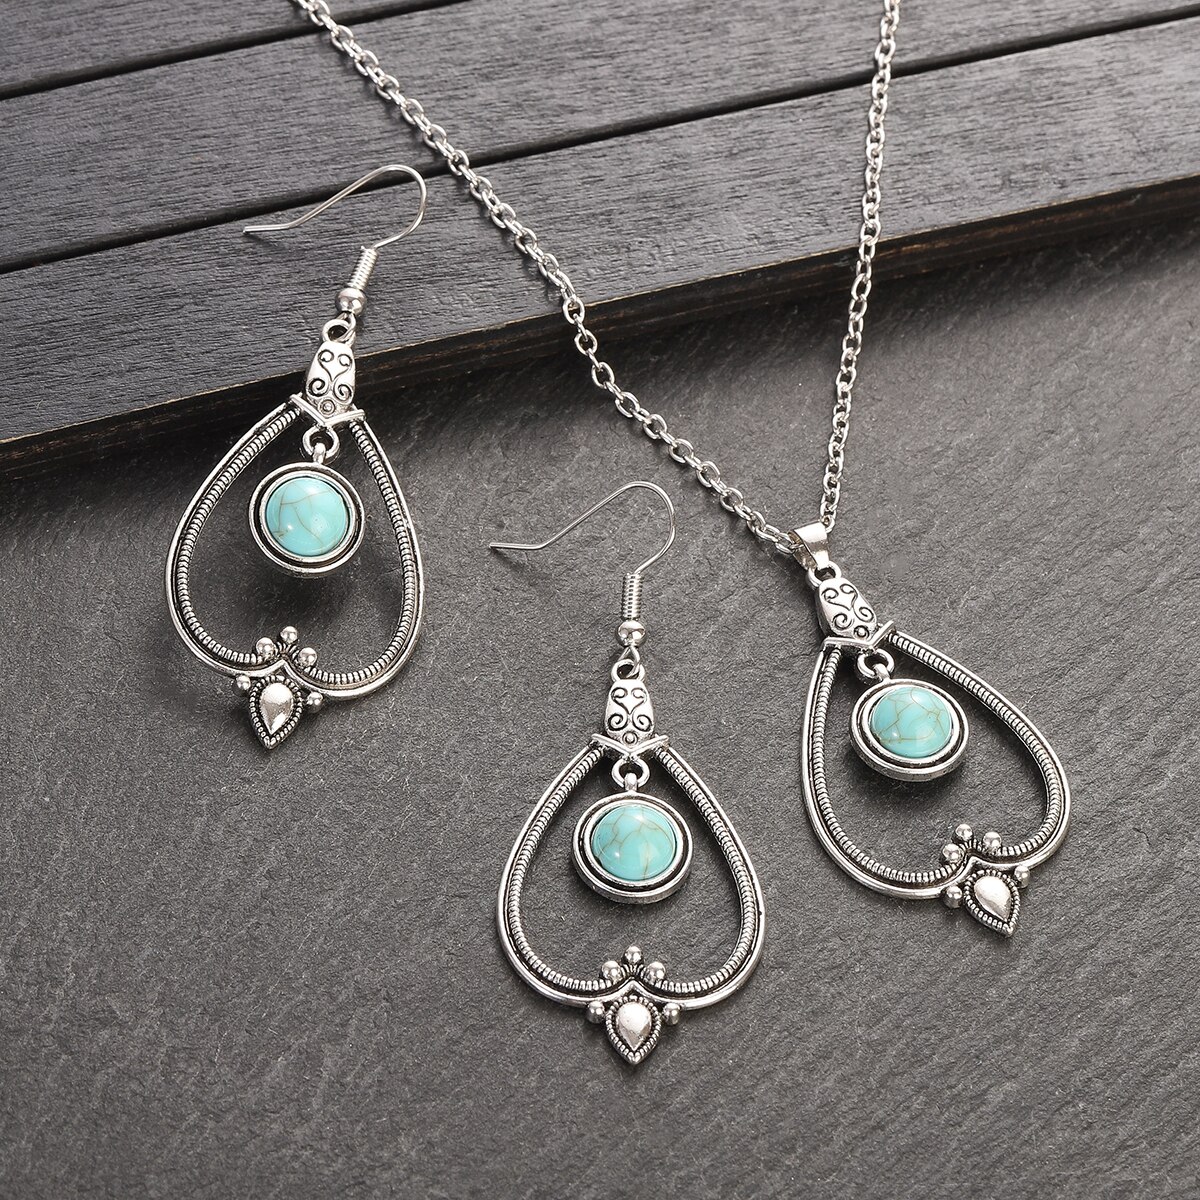 Classic-Ethnic-Silver-Color-Water-Drop-Jewelry-Sets-Ladies-Bohemia-Colorful-Flowers-Pendant-Necklace-1005004920943652-4